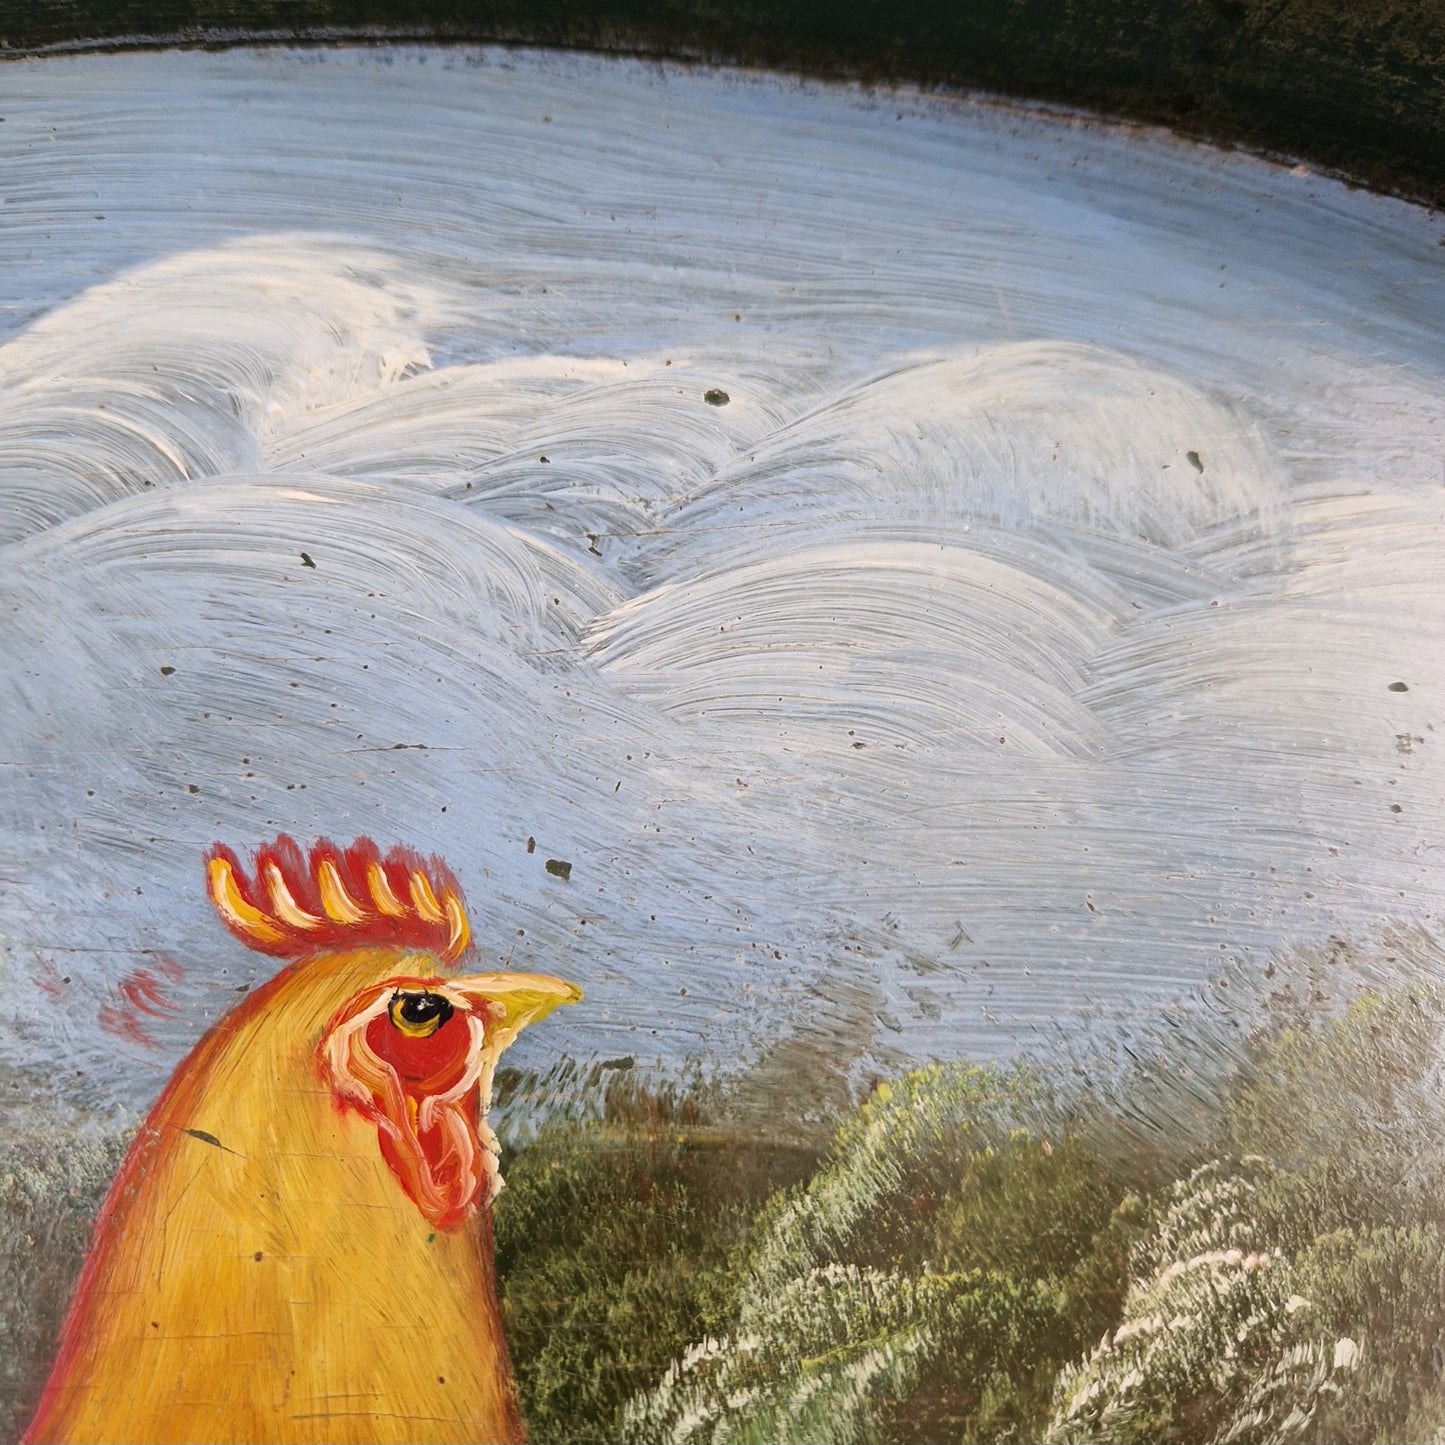 French hand painted vintage cockerel tray.